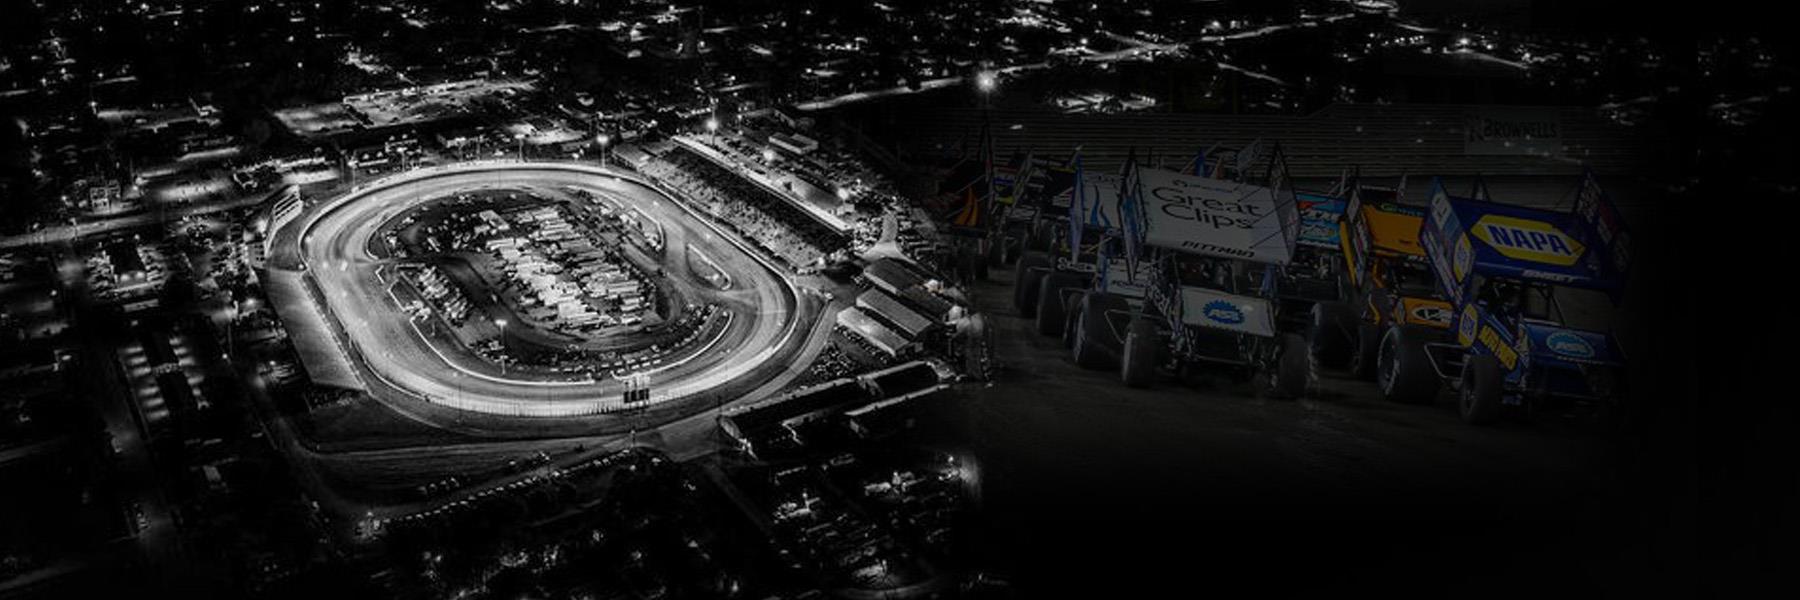 8/8/2021 - Knoxville Raceway